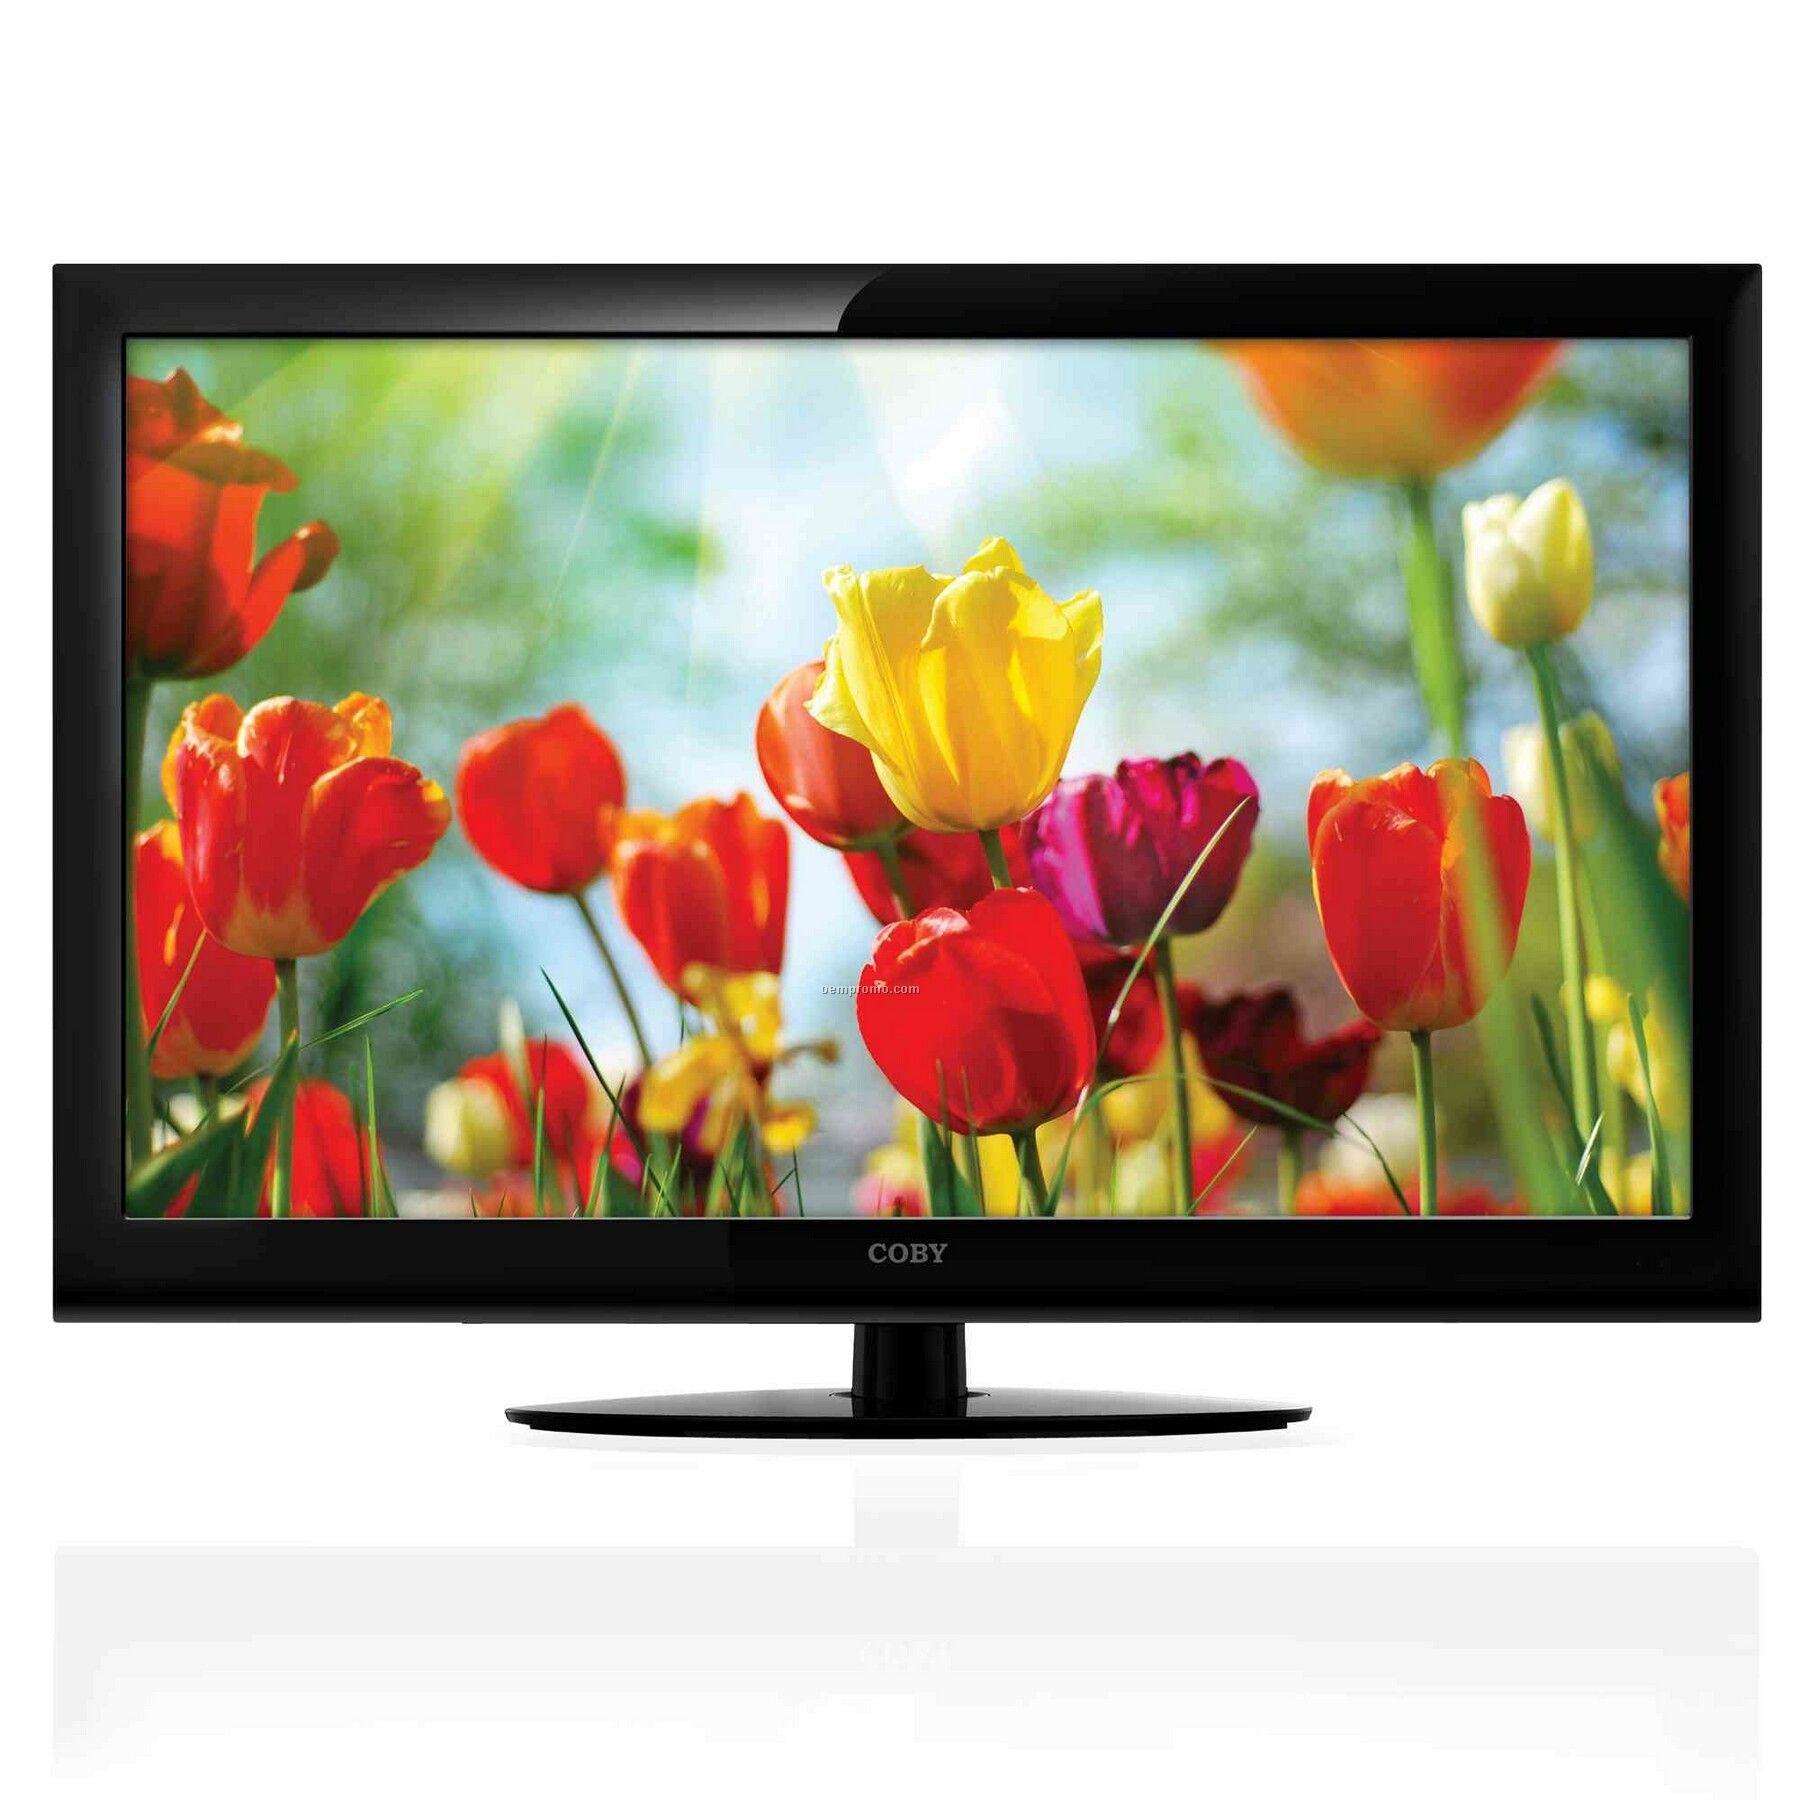 32" Class LED High-definition